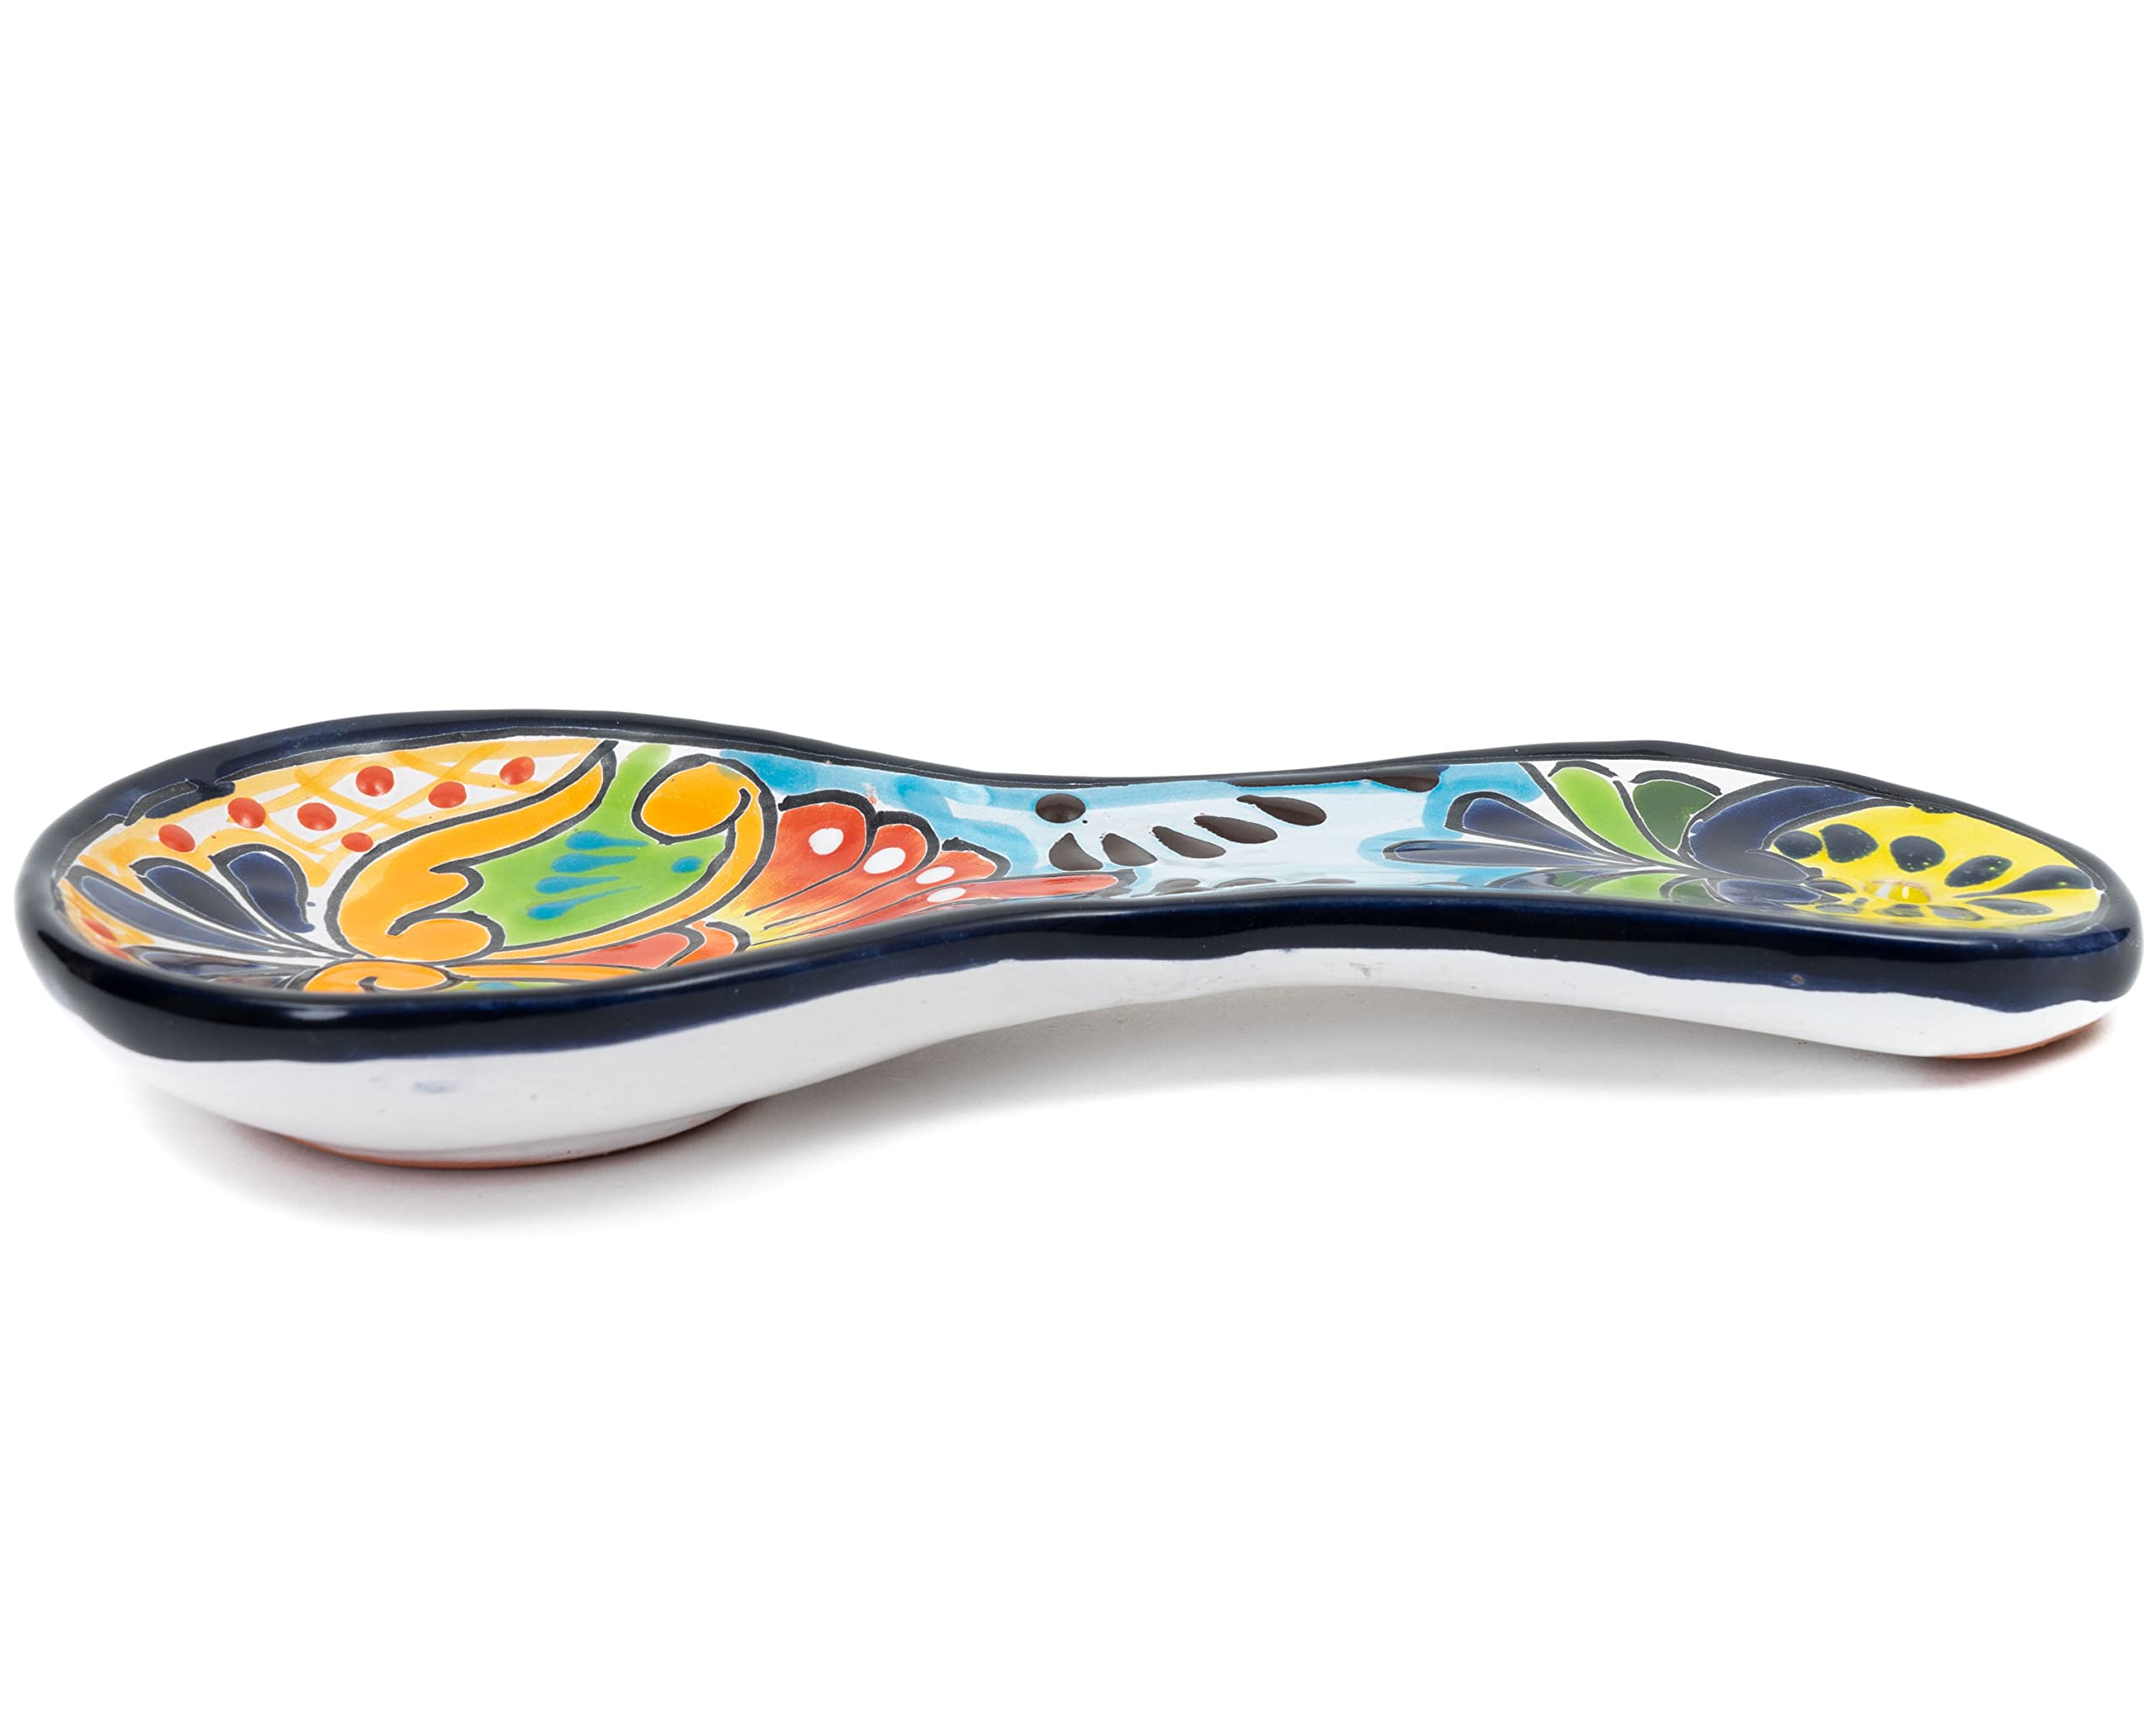 Enchanted Talavera Hand Painted Ceramic Spoon Rest Kitchen Counter top Utensil Holder For Spoons Spanish Mexican Decorations (Multi)